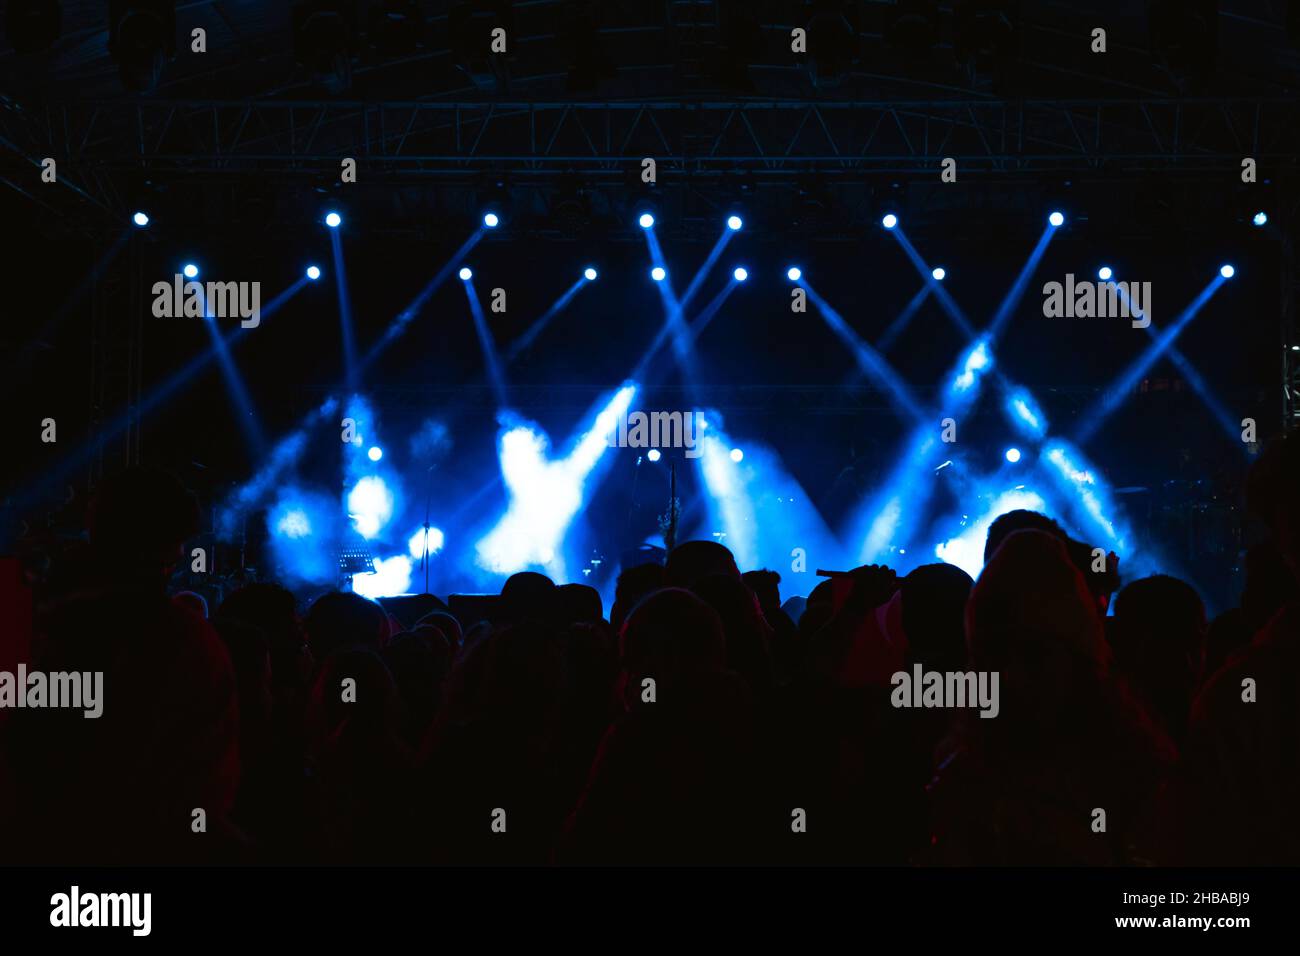 Concert background. Silhouette of crowd in the concert background photo.  Stock Photo